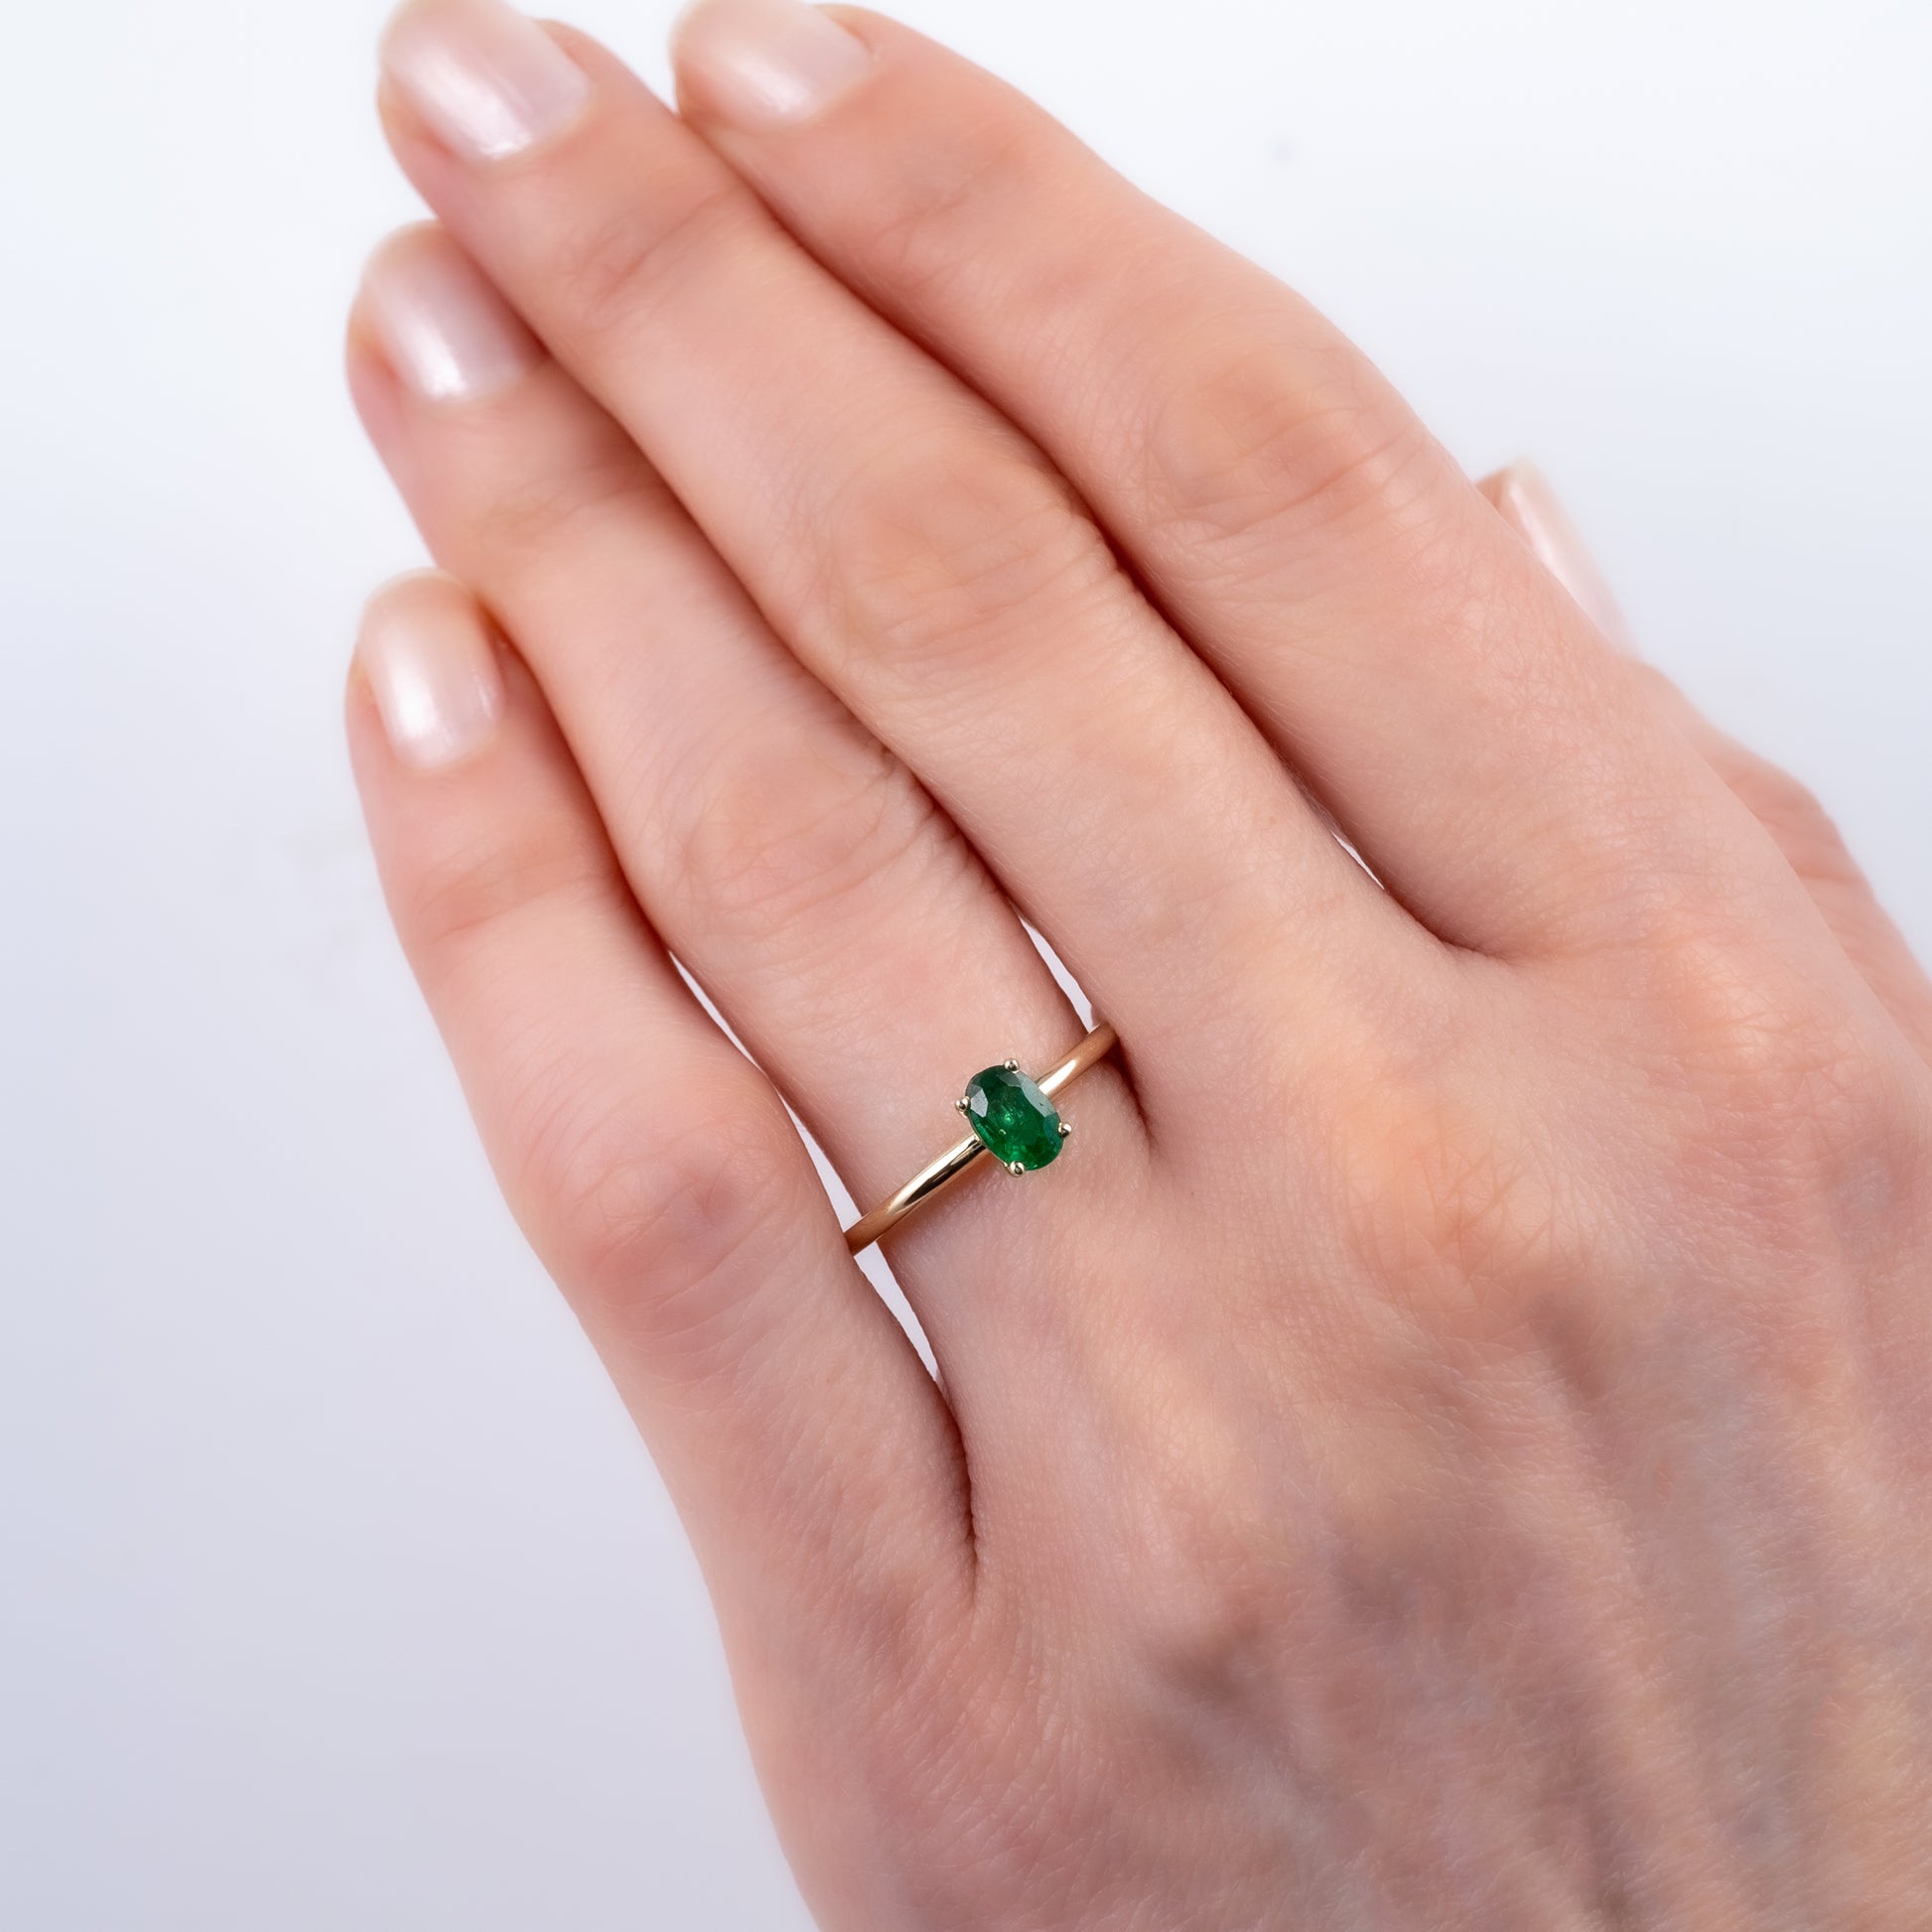 oval emerald solitaire ring